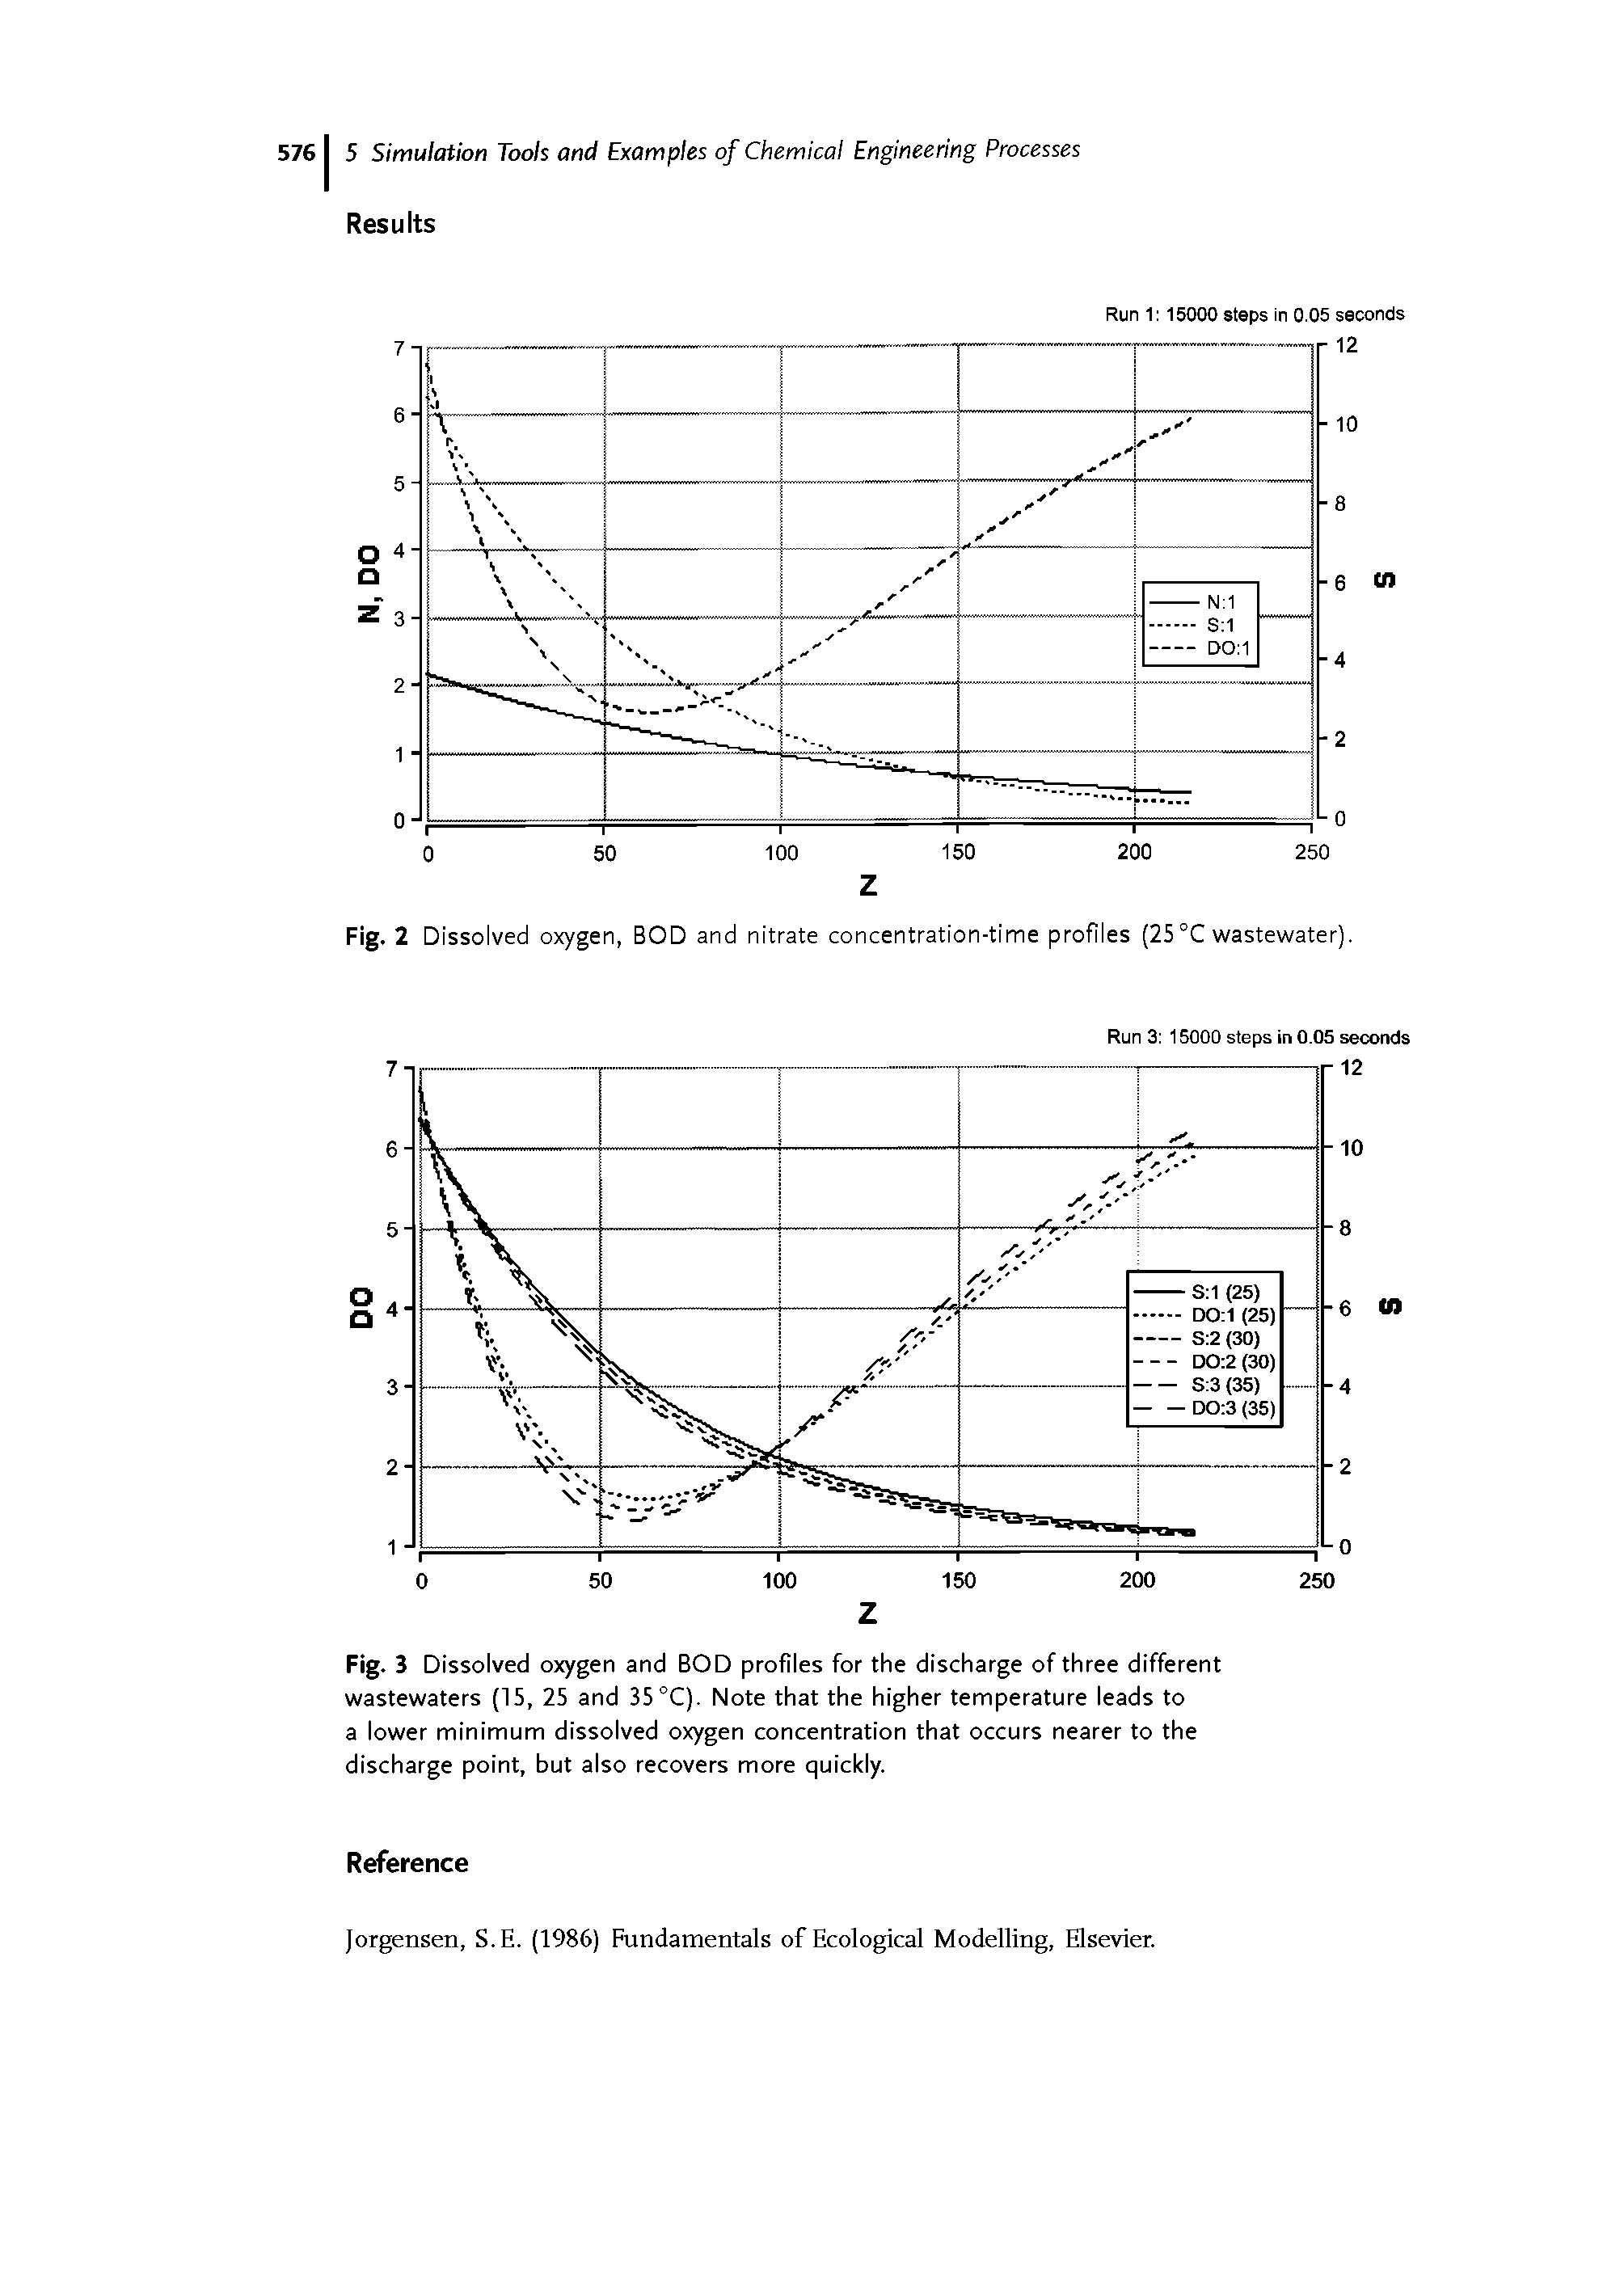 Fig. 2 Di ssolved oxygen, BOD and nitrate concentration-time profiles (25 °C wastewater).